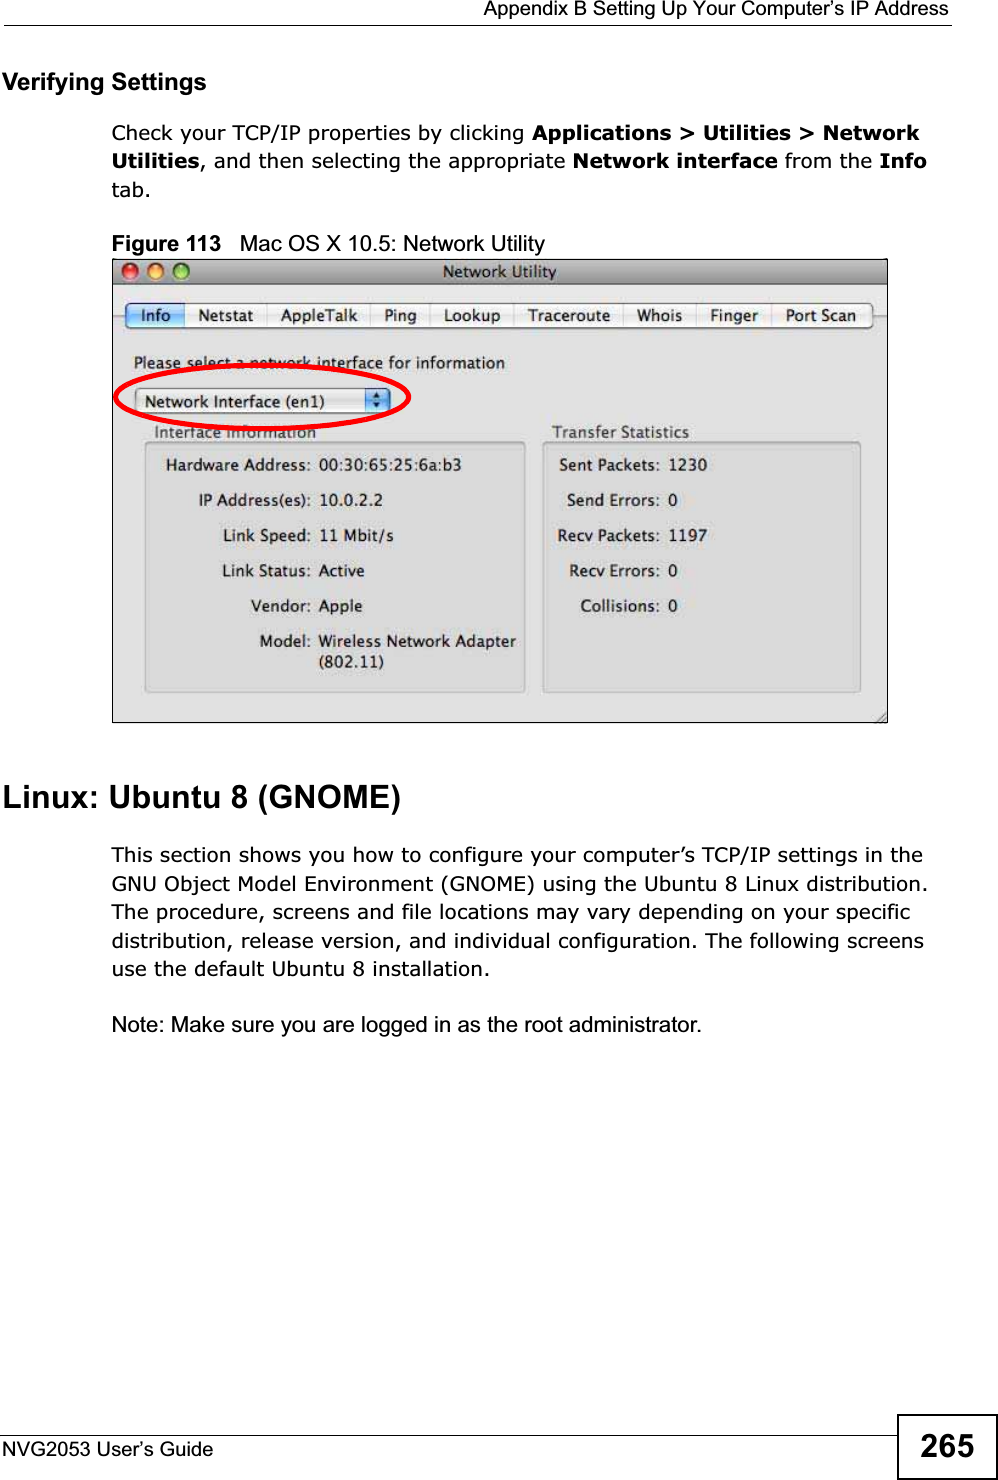  Appendix B Setting Up Your Computer’s IP AddressNVG2053 User’s Guide 265Verifying SettingsCheck your TCP/IP properties by clicking Applications &gt; Utilities &gt; Network Utilities, and then selecting the appropriate Network interface from the Infotab.Figure 113   Mac OS X 10.5: Network UtilityLinux: Ubuntu 8 (GNOME)This section shows you how to configure your computer’s TCP/IP settings in the GNU Object Model Environment (GNOME) using the Ubuntu 8 Linux distribution. The procedure, screens and file locations may vary depending on your specific distribution, release version, and individual configuration. The following screens use the default Ubuntu 8 installation.Note: Make sure you are logged in as the root administrator. 